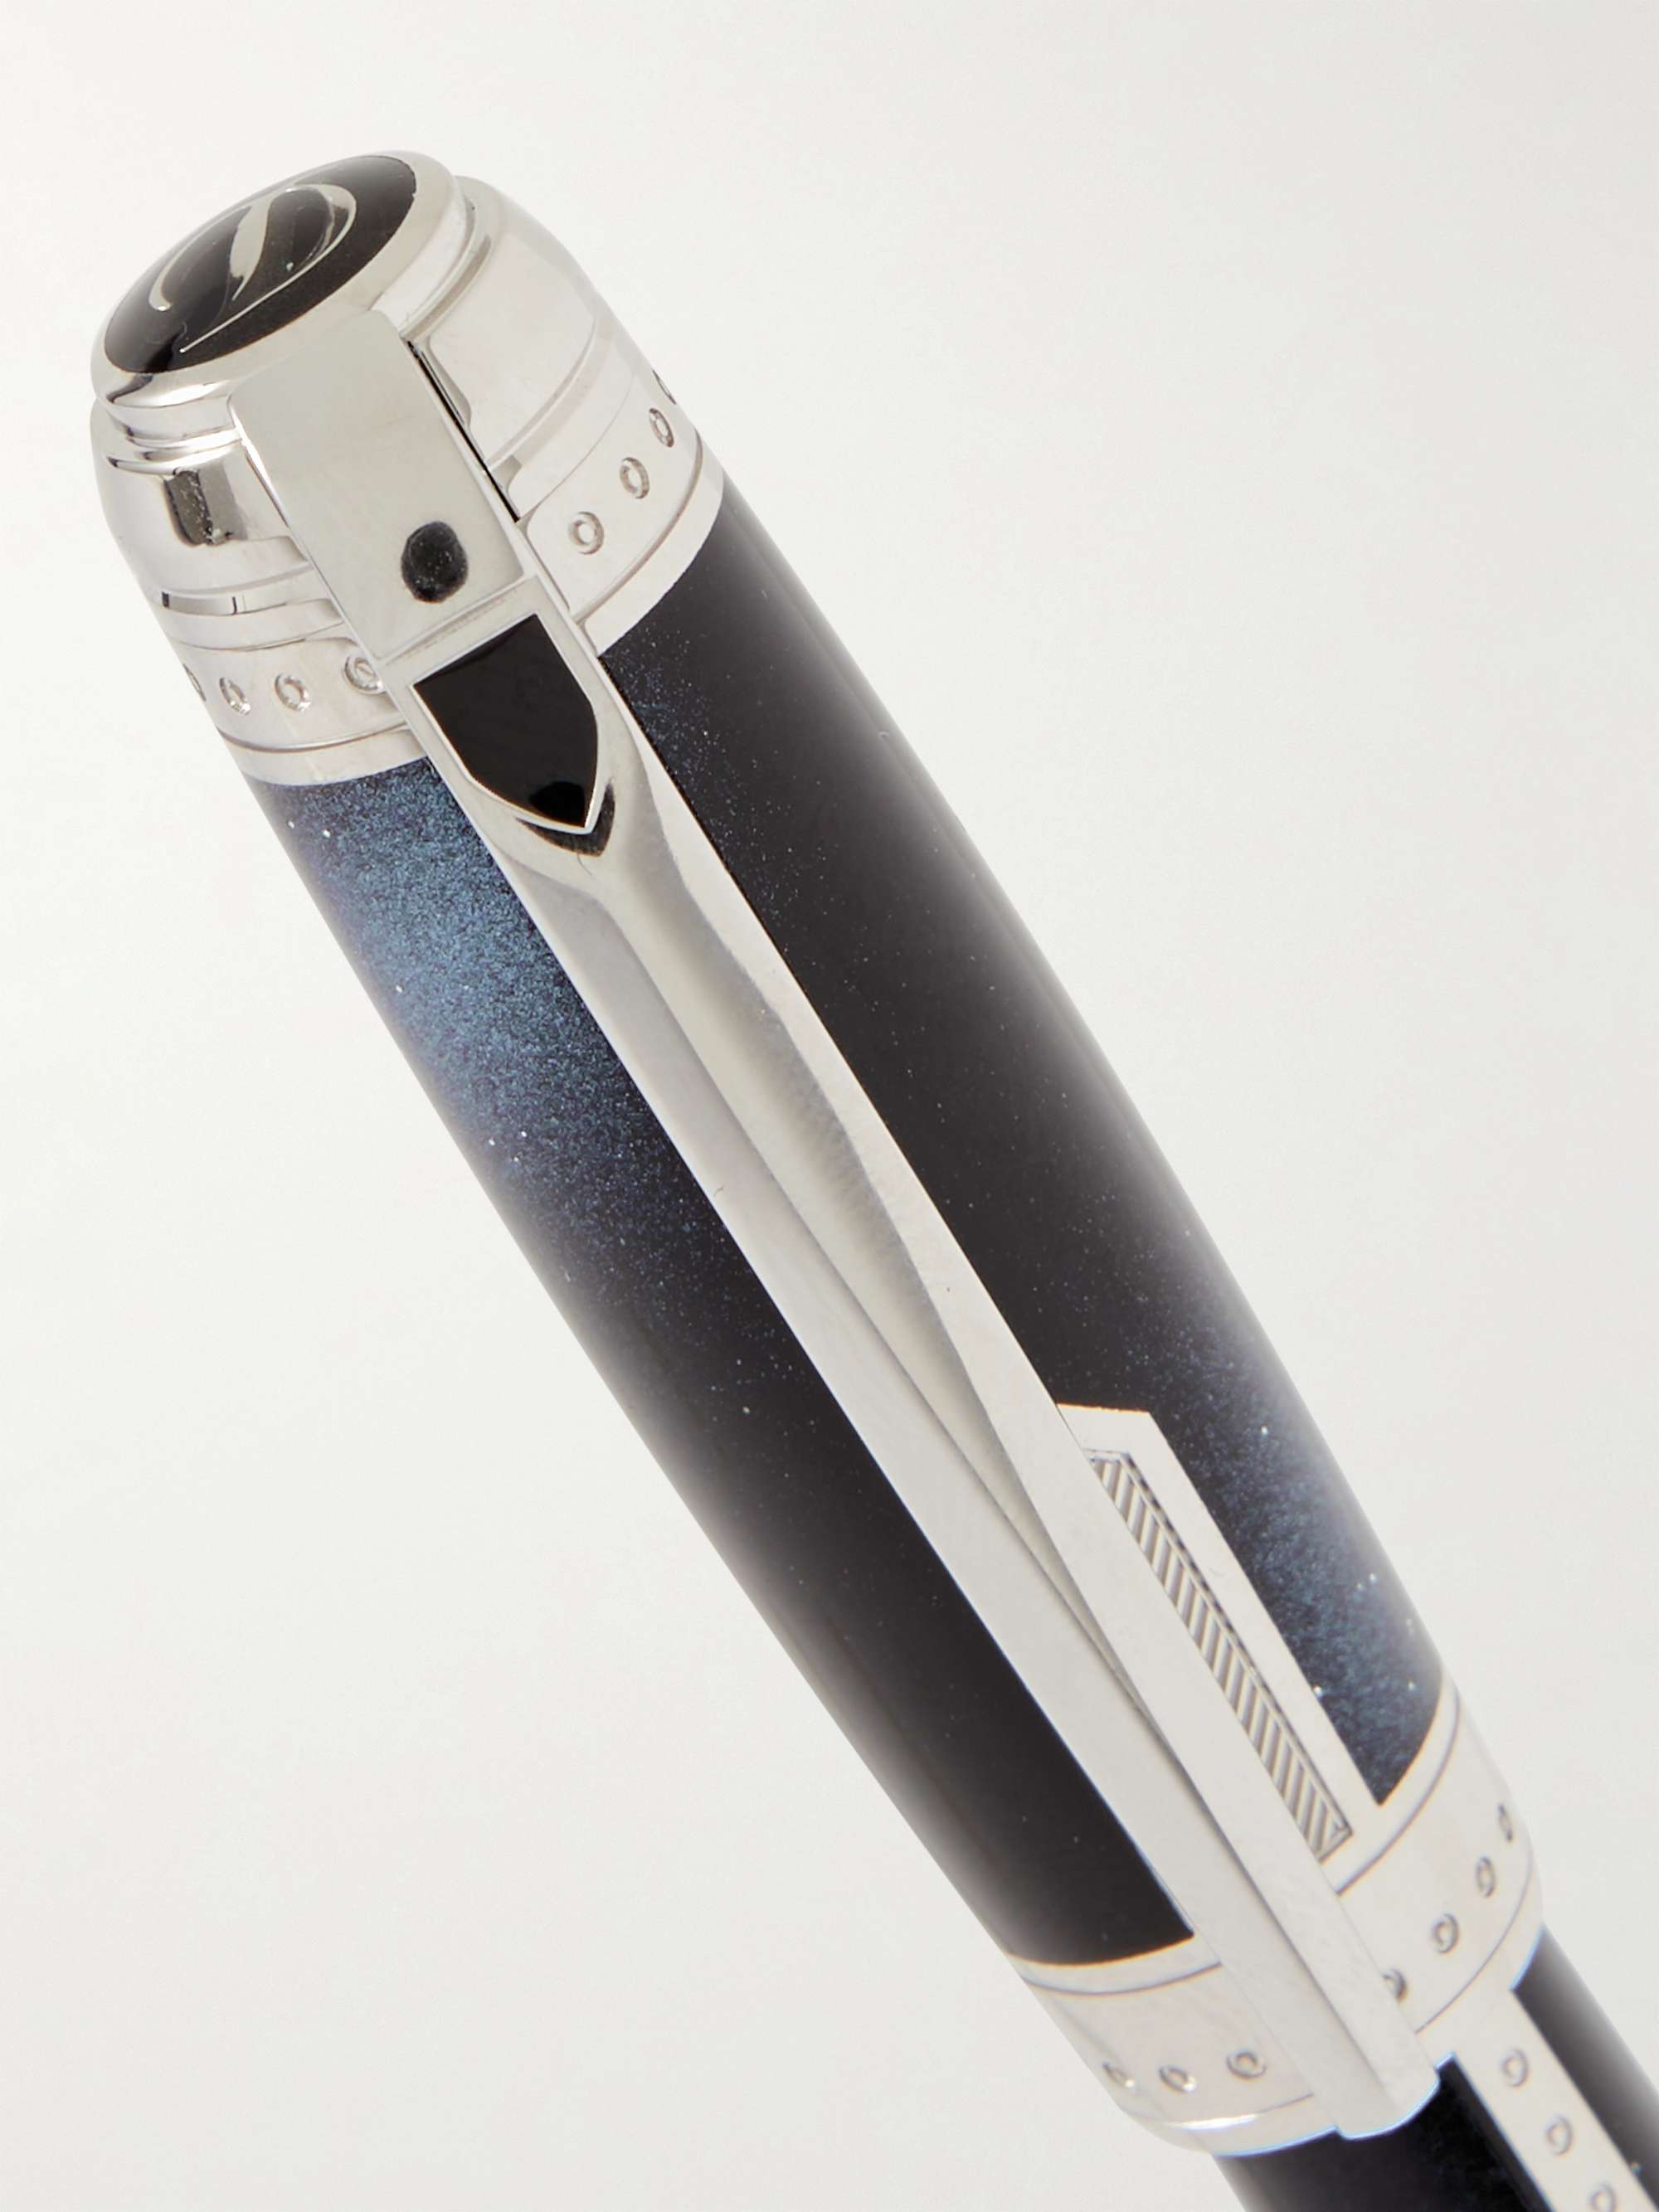 S.T. DUPONT Space Odyssey Palladium-Coated and Enamel Fountain Pen